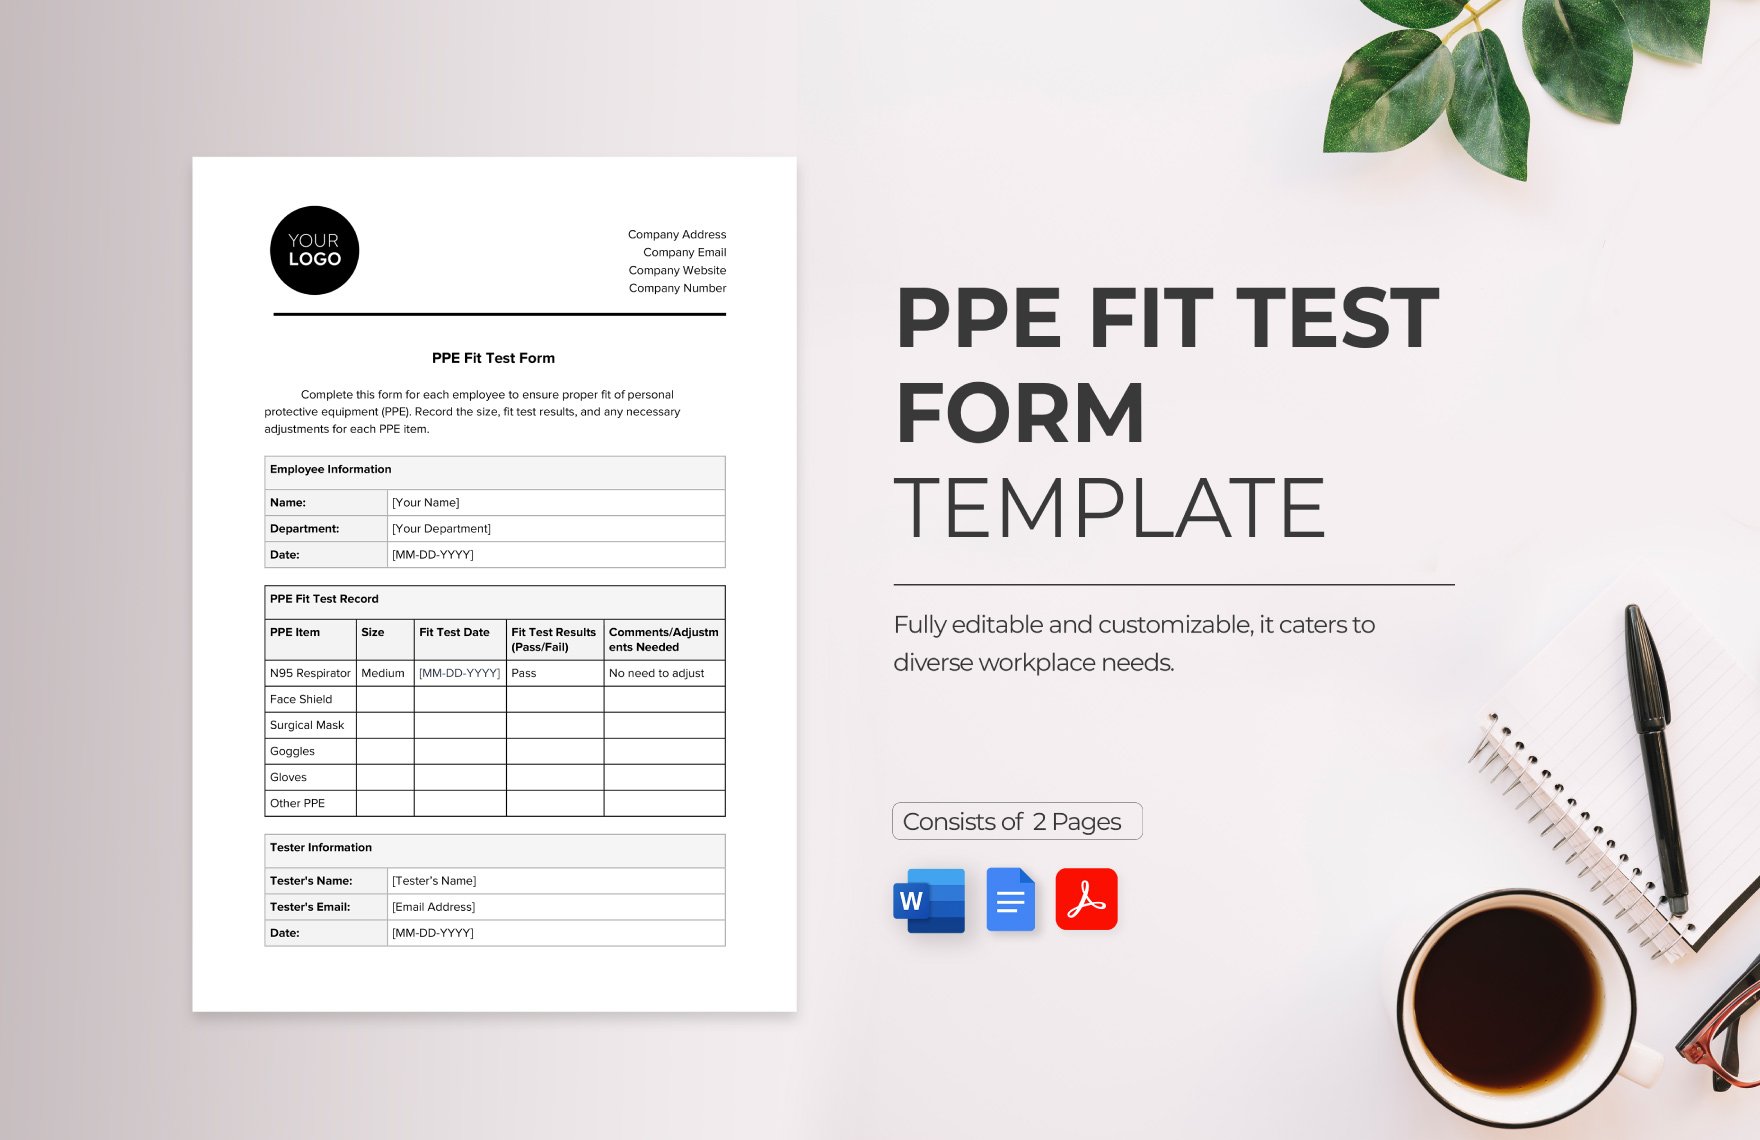 PPE Fit Test Form Template